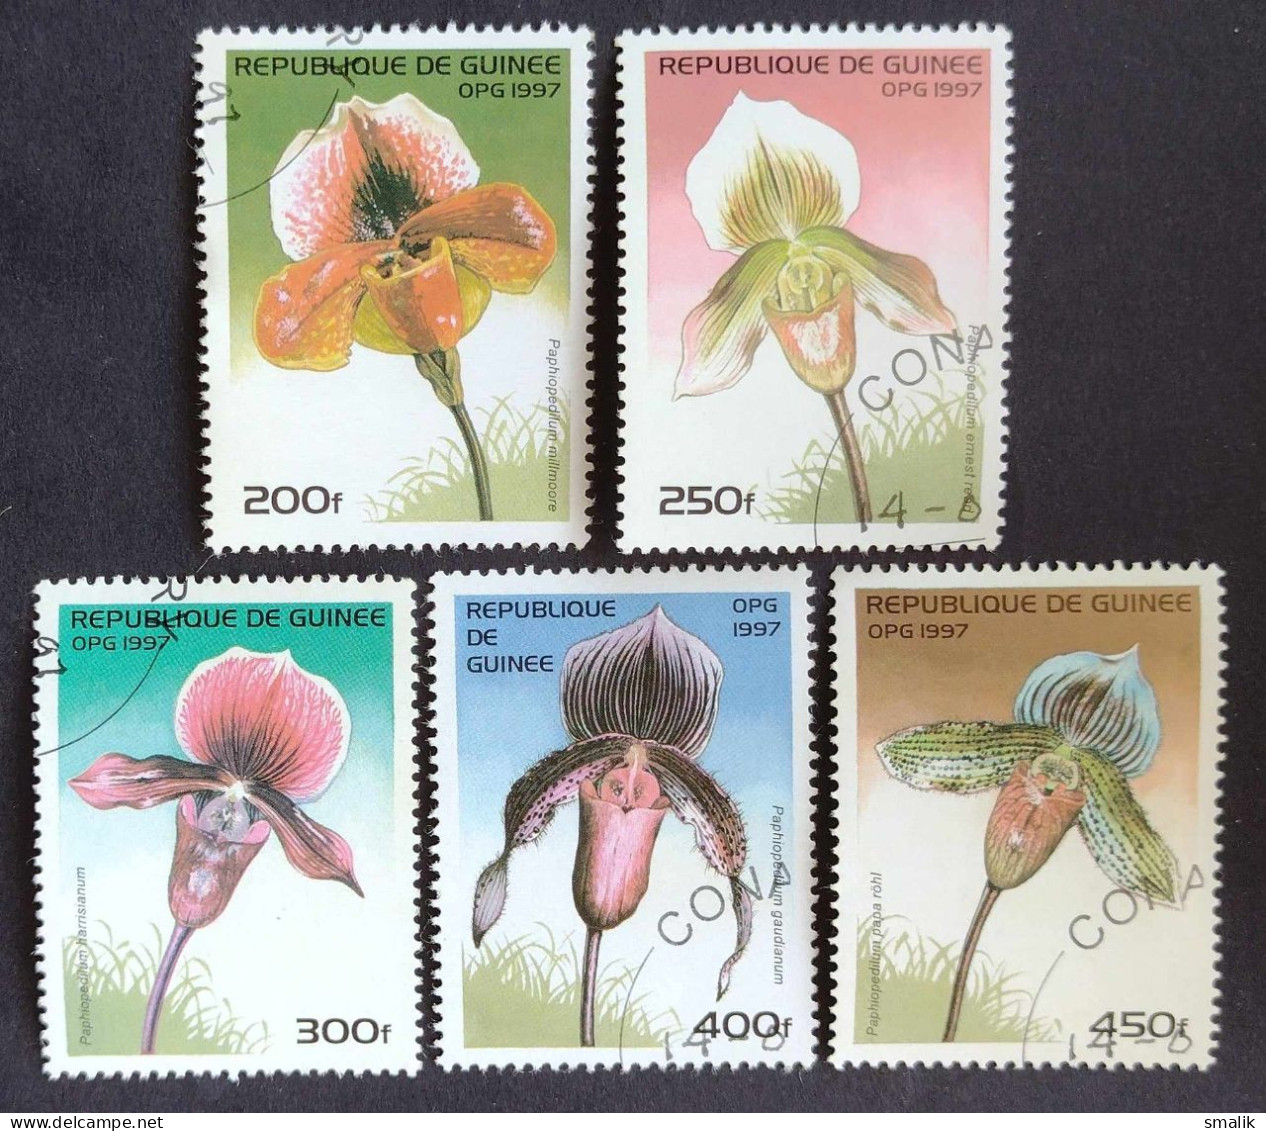 GUINEE REPUBLIC 1997 - Flowers, Set Of 5 Stamps, Fine Used - Guinea (1958-...)